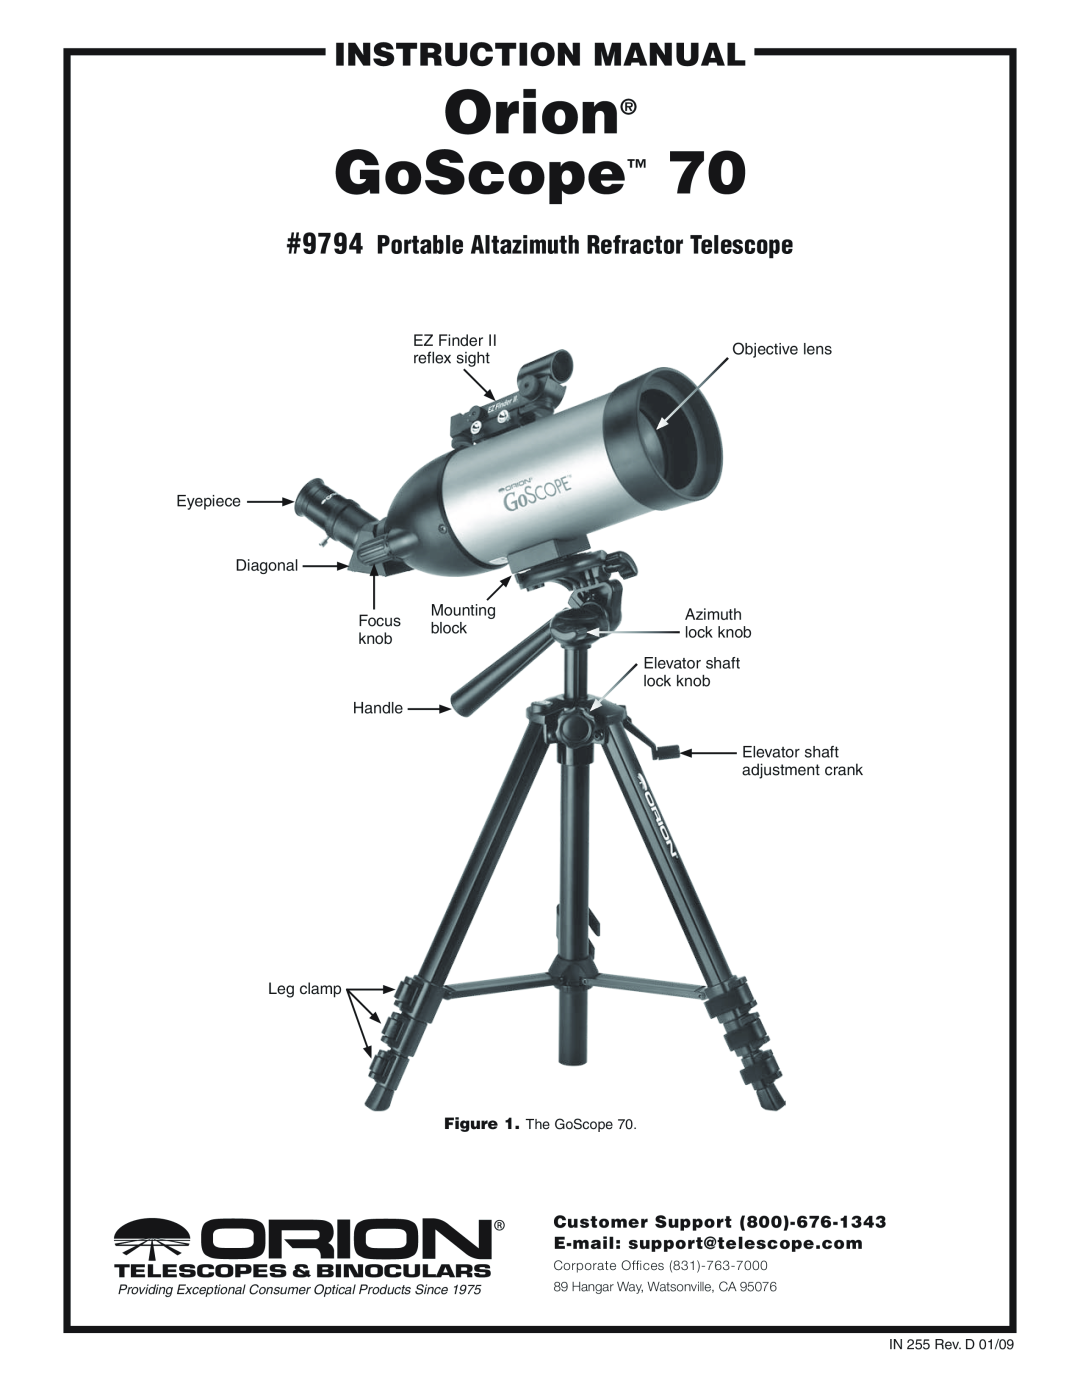 Orion 70 instruction manual #9794Portable Altazimuth Refractor Telescope, Customer Support 800‑676-1343, Orion, GoScope 